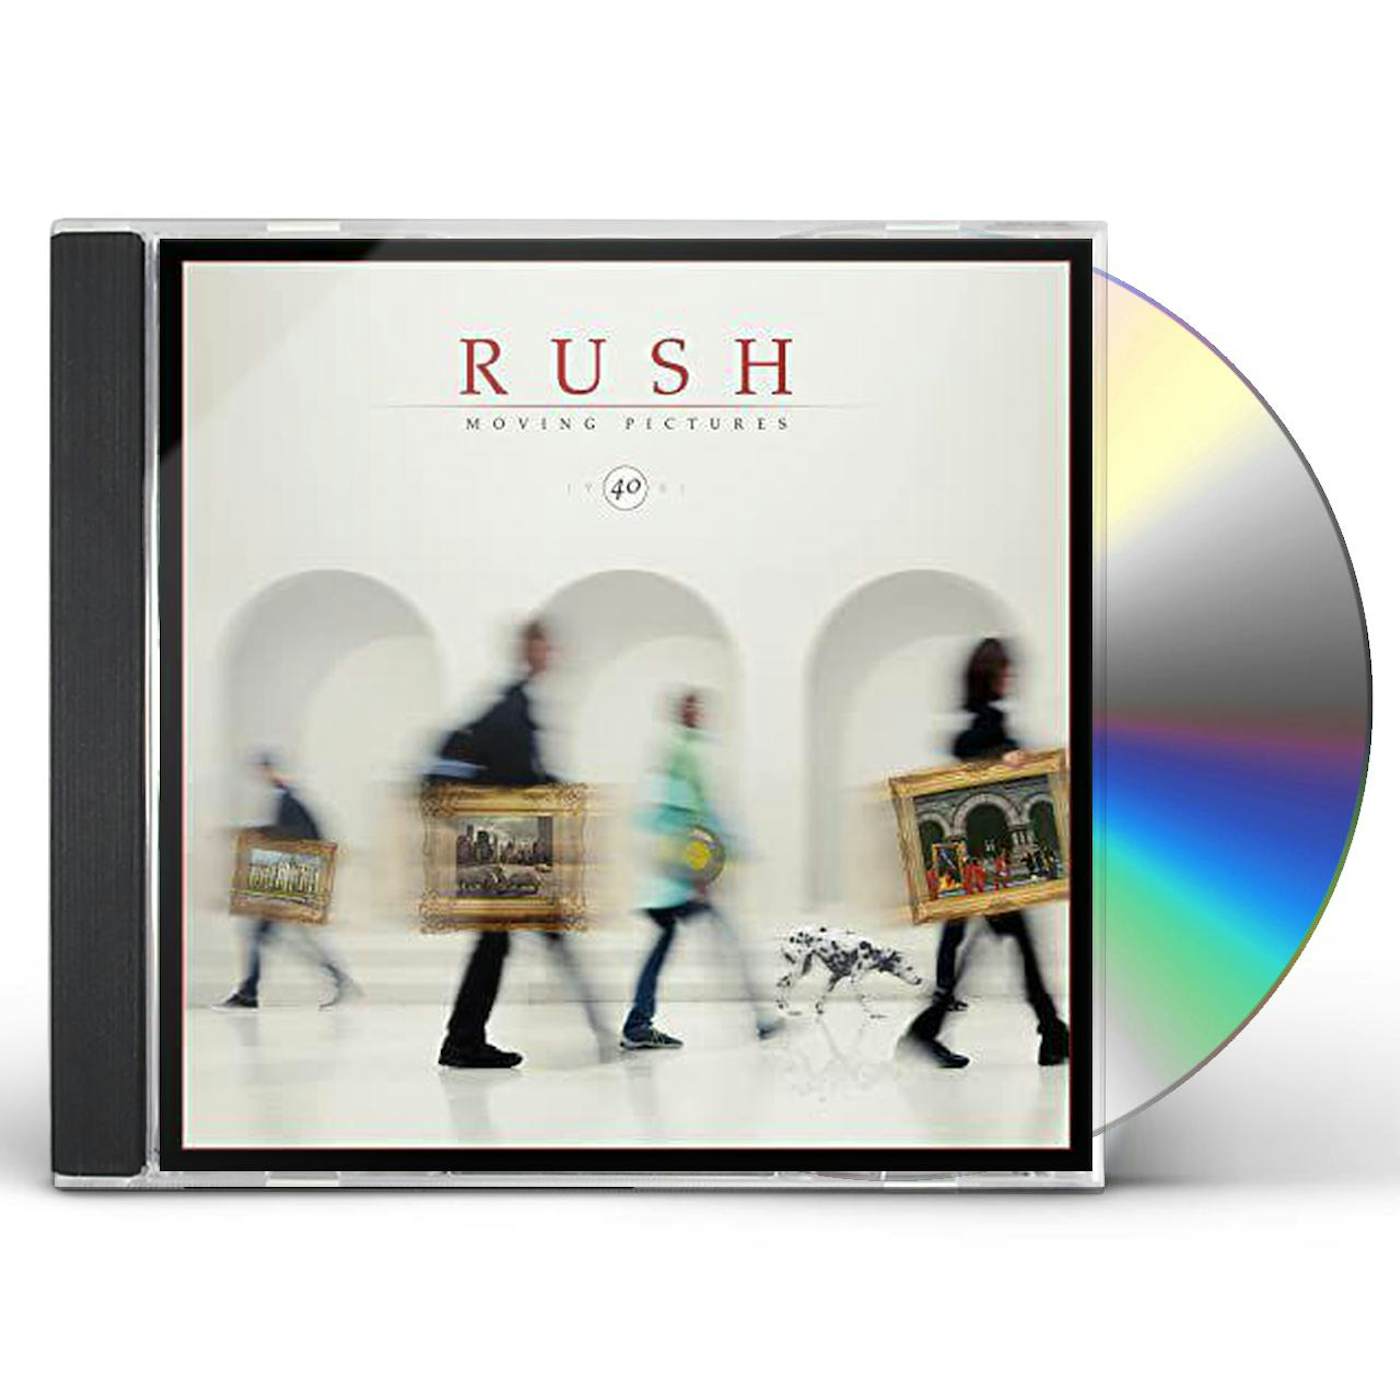 Rush - Moving Pictures (remastered) - CD